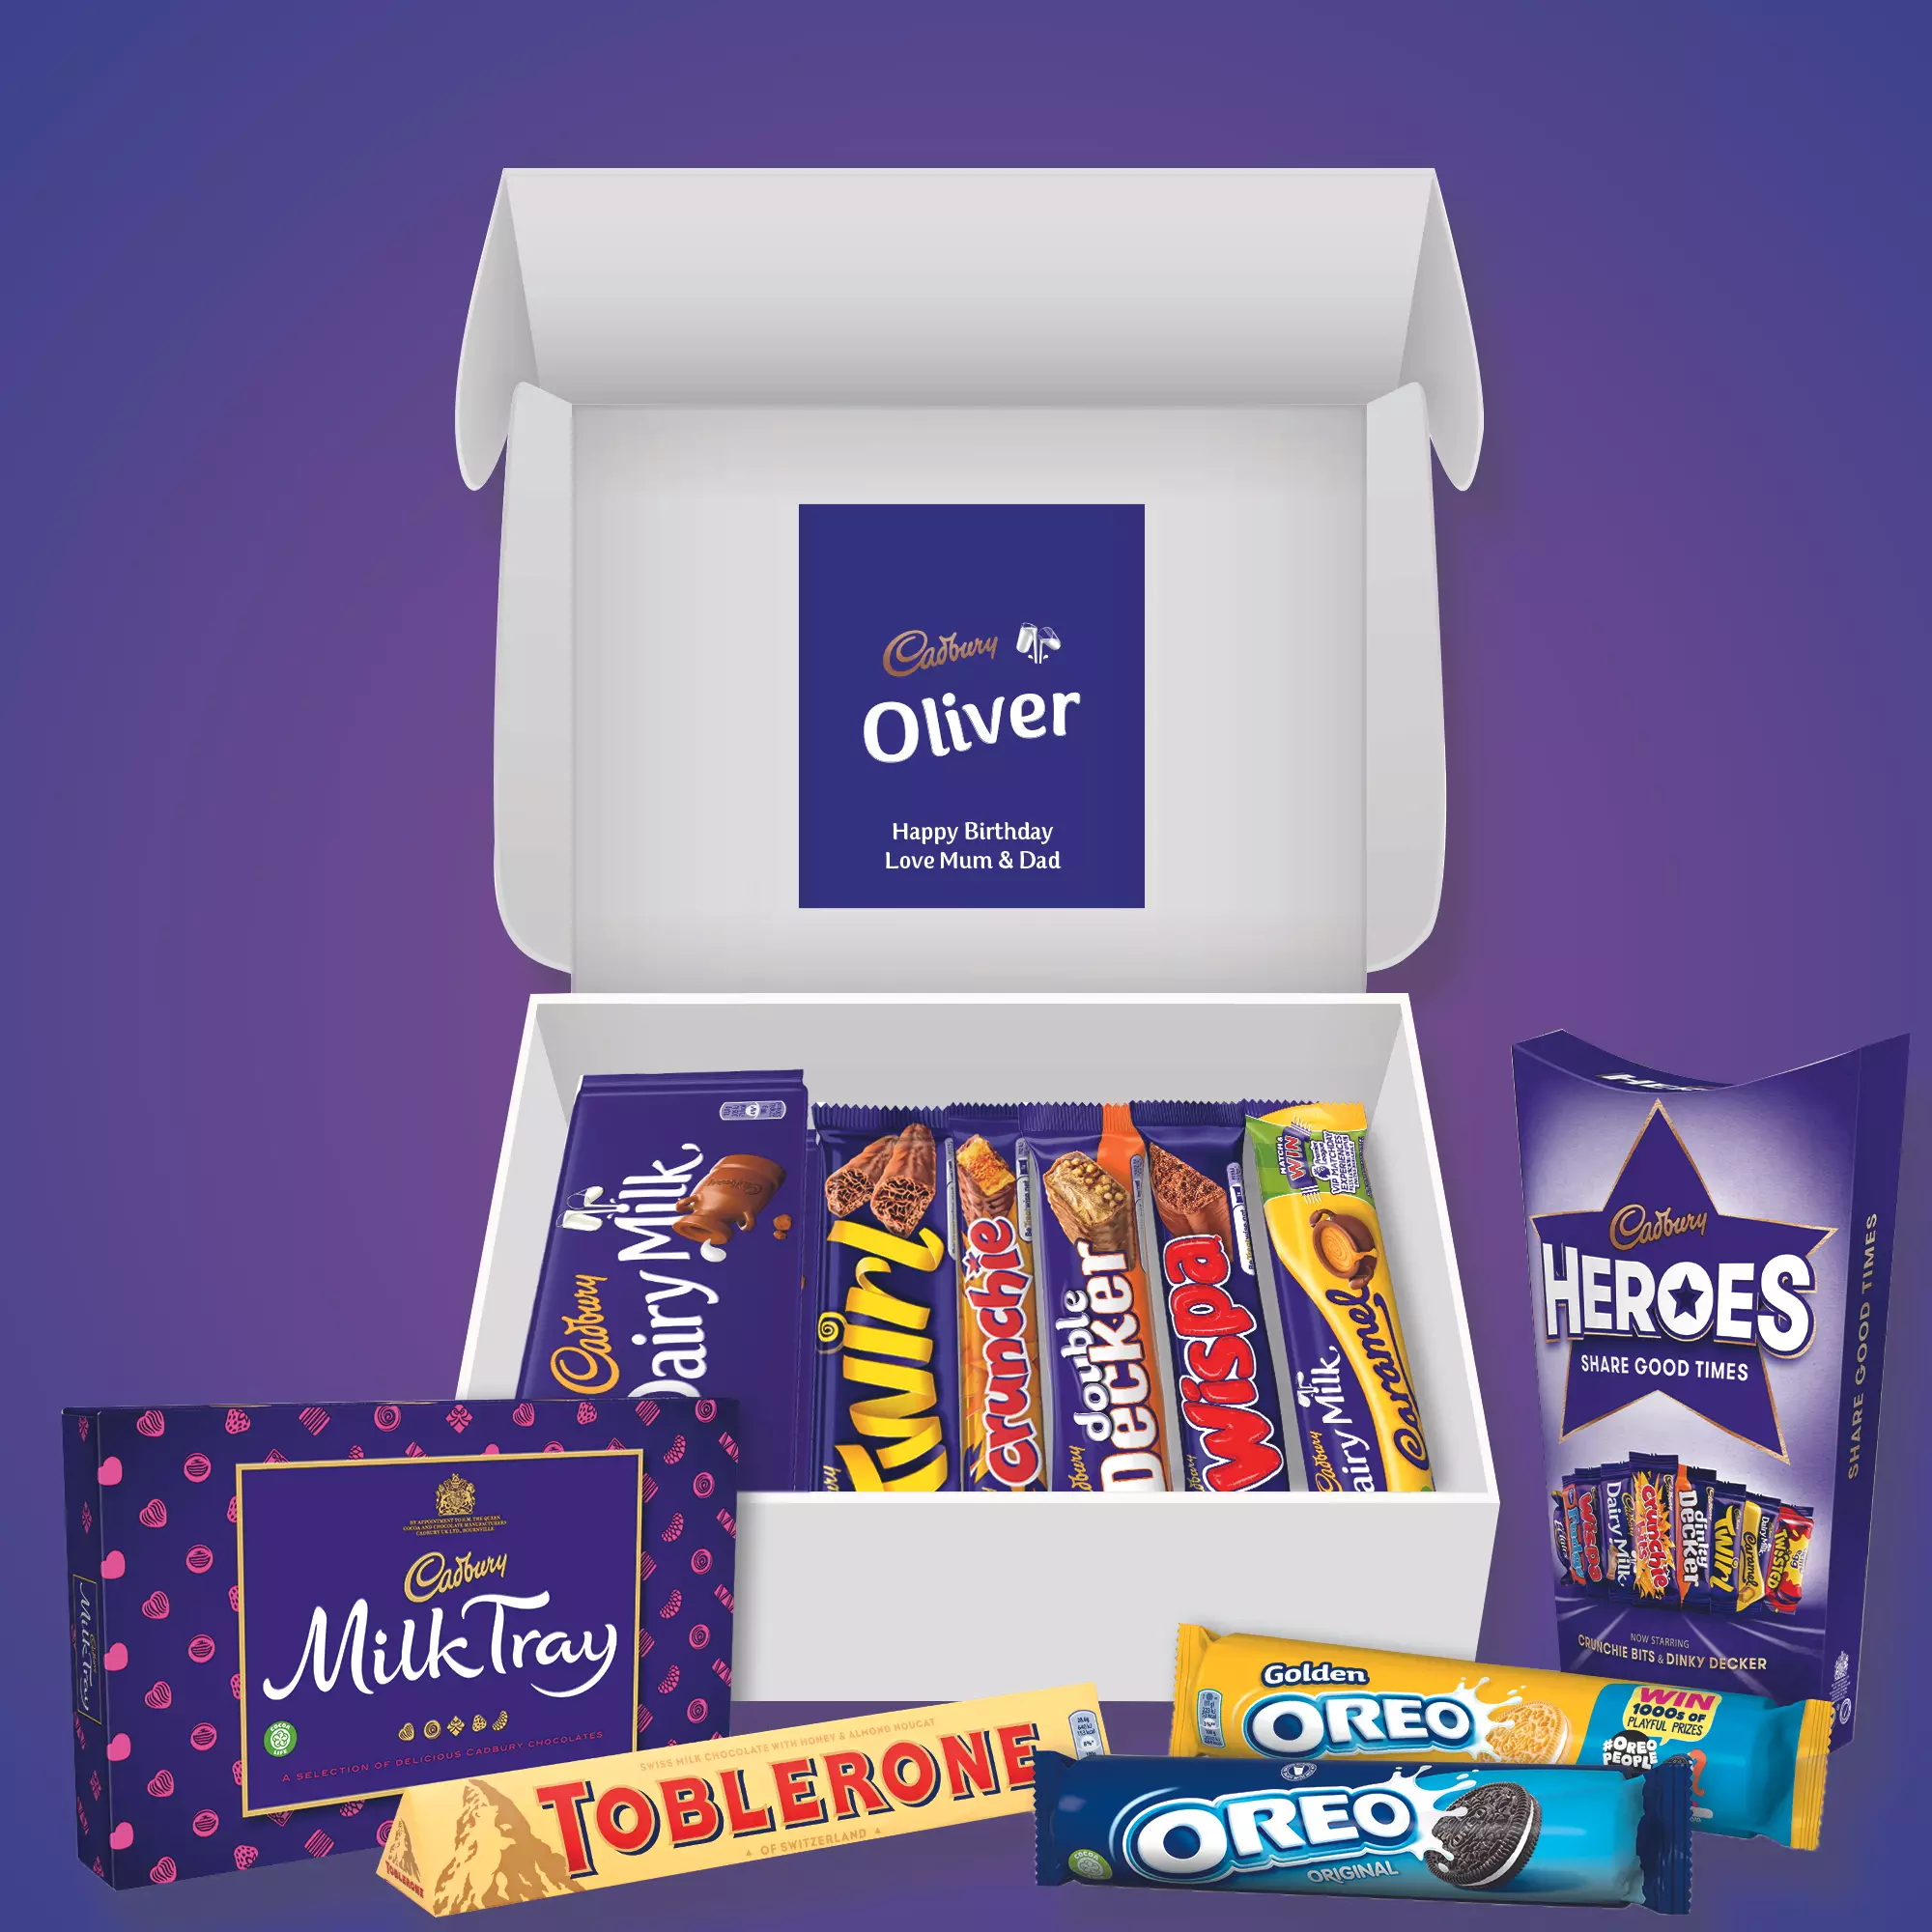 Or maybe a hamper of chocolate is more to your liking? (